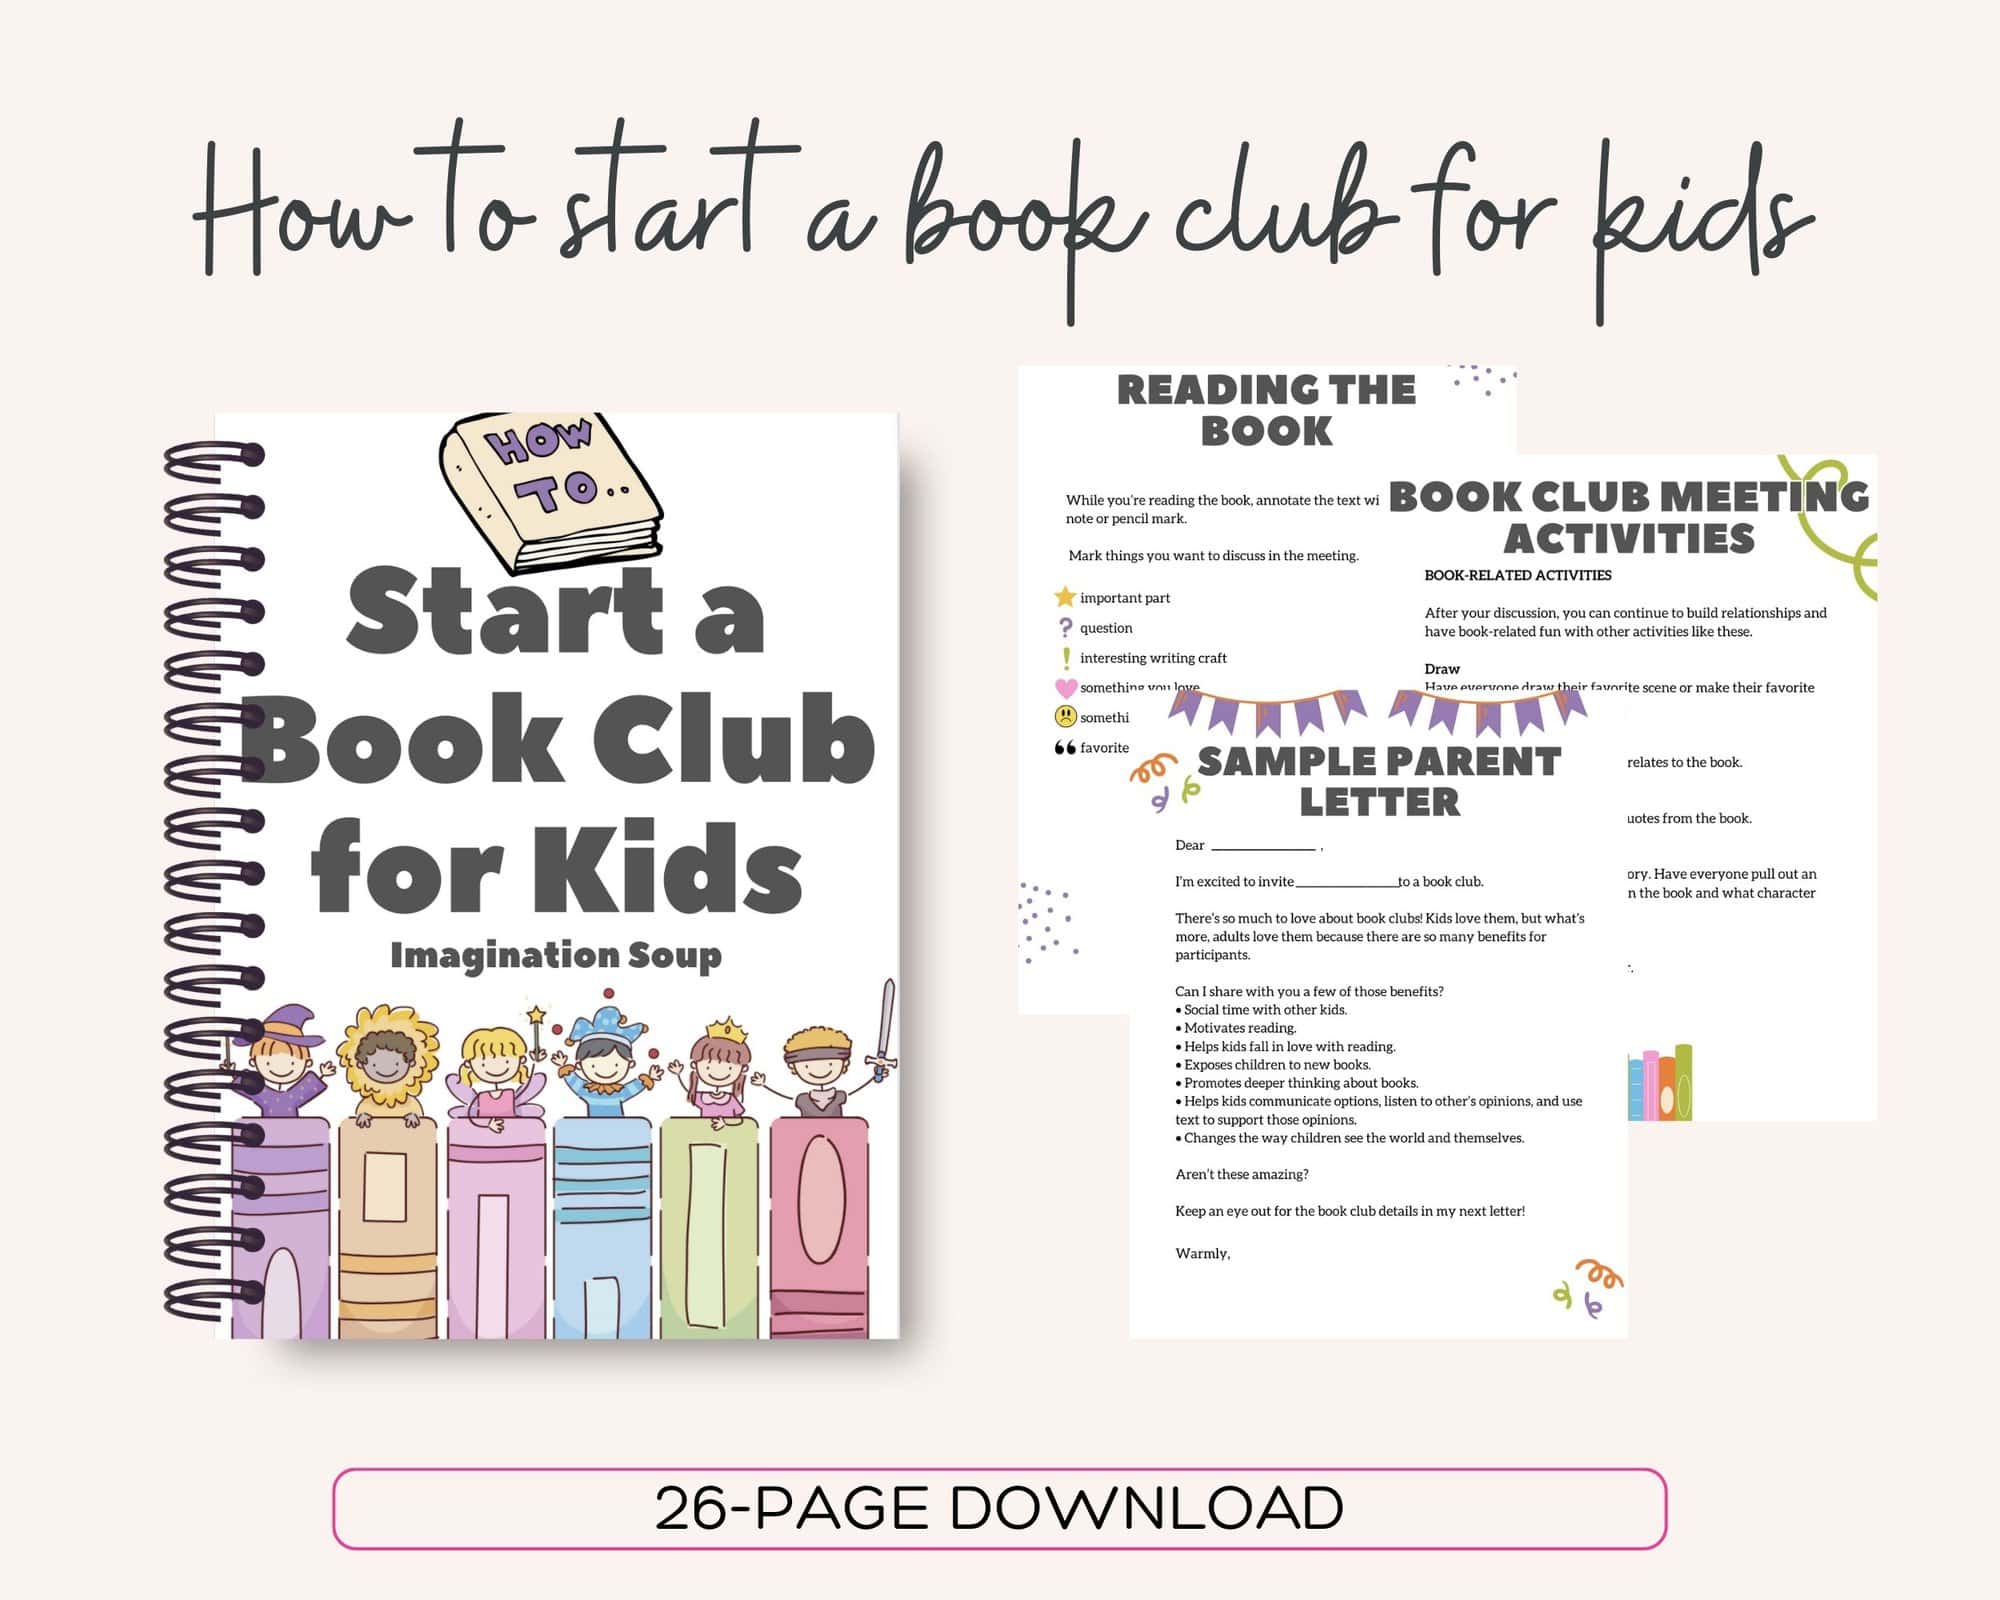 HOW TO START A BOOK CLUB FOR KIDS